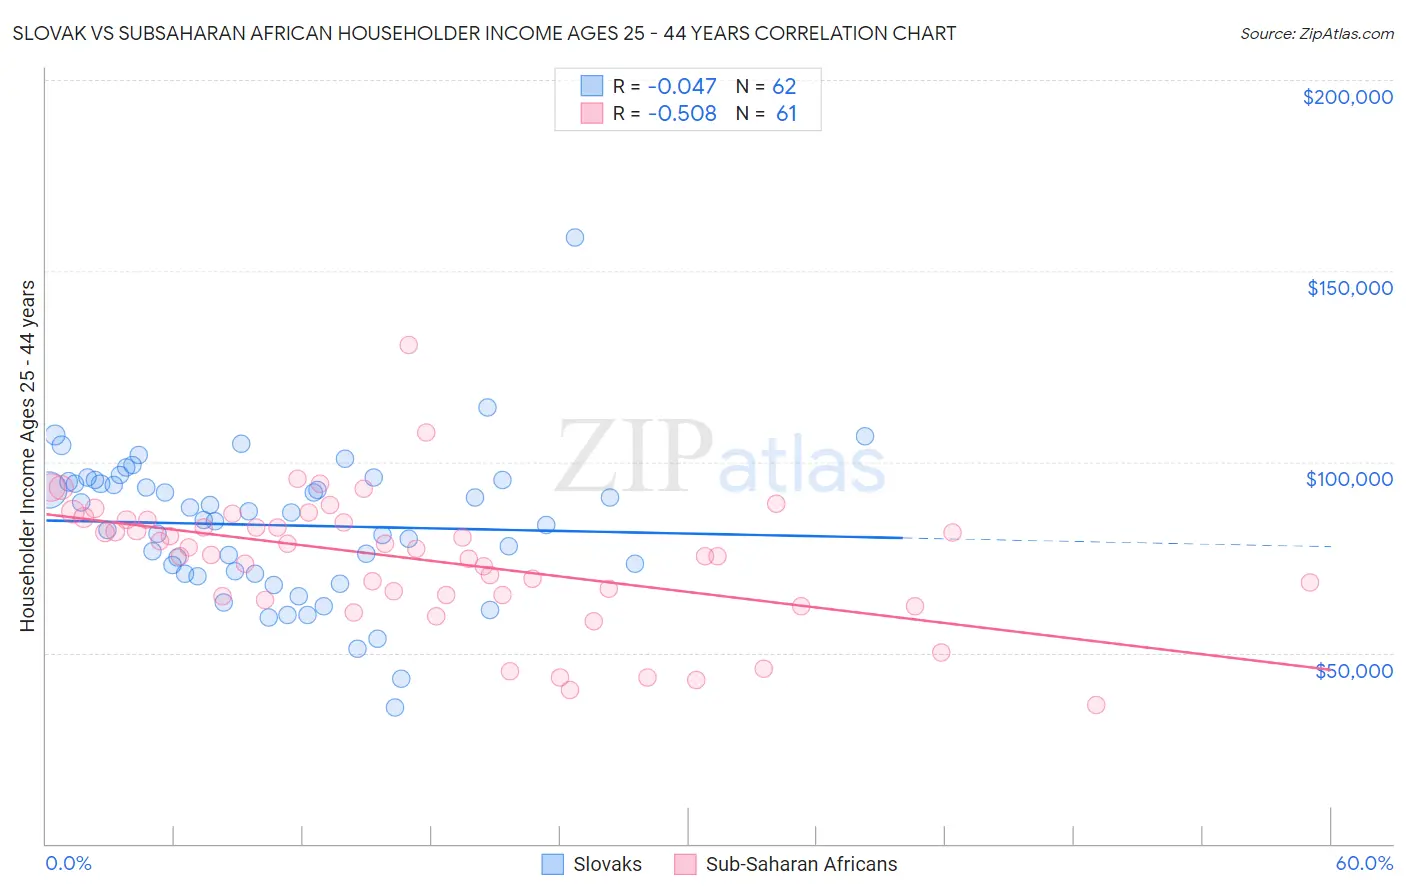 Slovak vs Subsaharan African Householder Income Ages 25 - 44 years